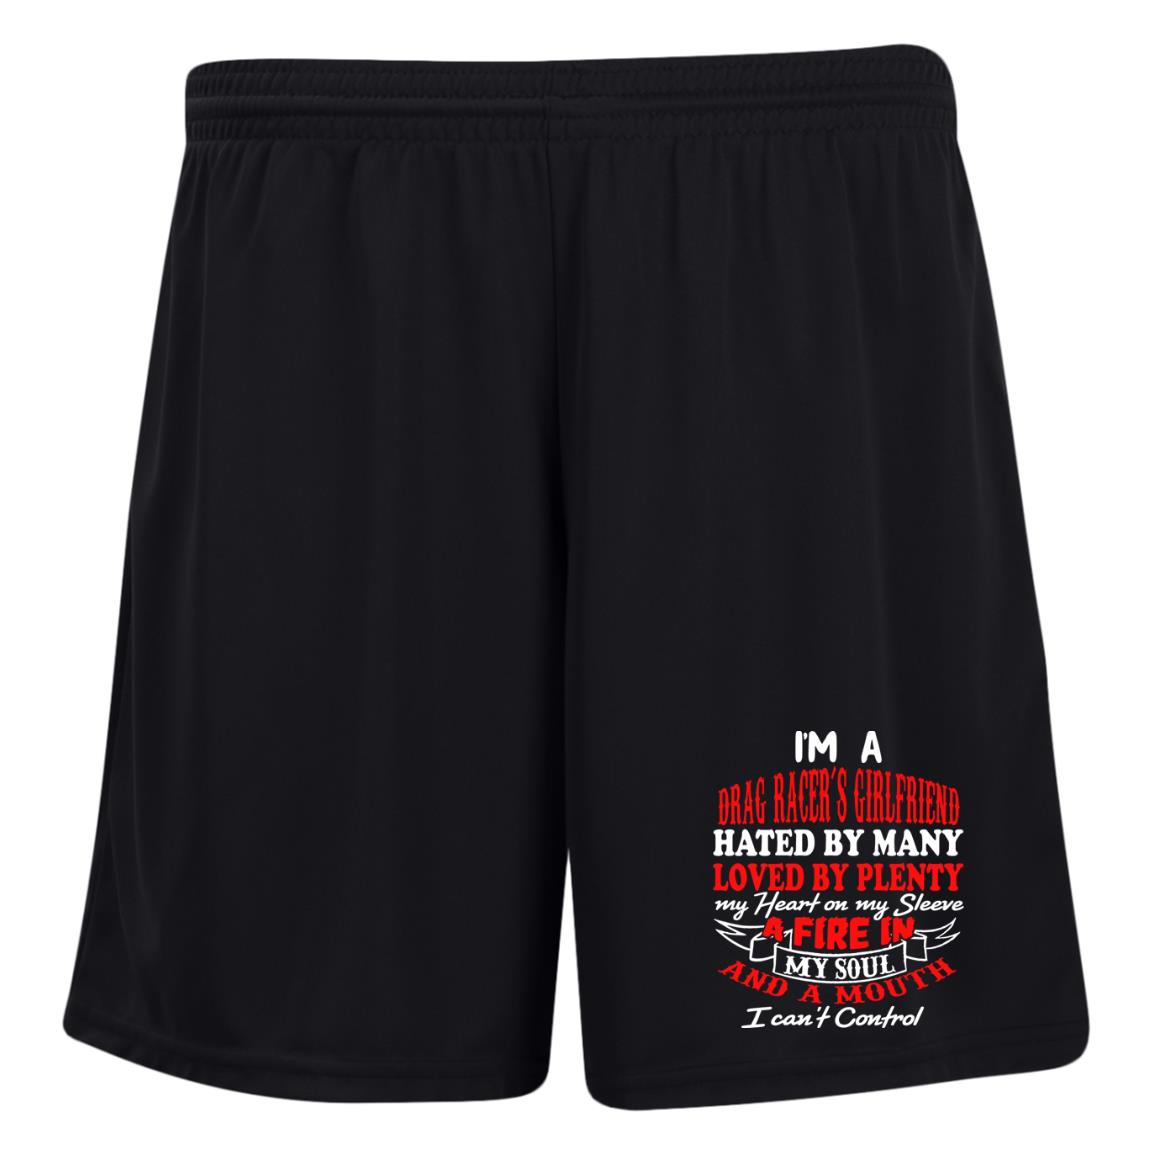 I'm A Drag Racer's Girlfriend Hated By Many Loved By Plenty Ladies' Moisture-Wicking 7 inch Inseam Training Shorts